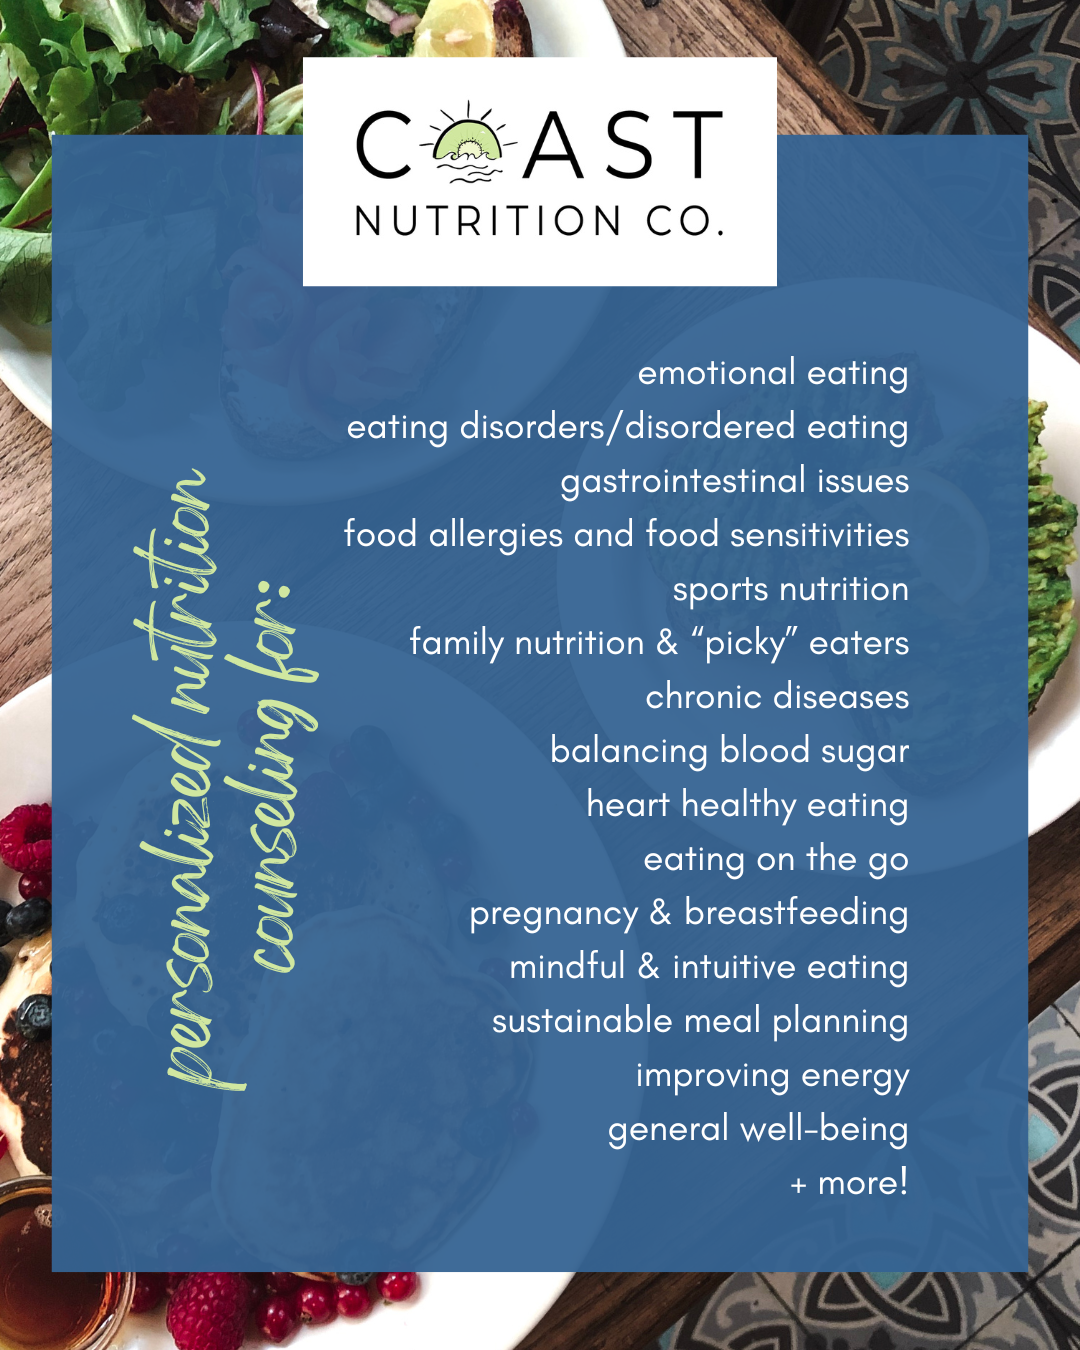 Coast Nutrition Co. helps with a wide variety of disease states and conditions. From learning healthy eating habits to eating disorders, we can help food feel easy and enjoyable.